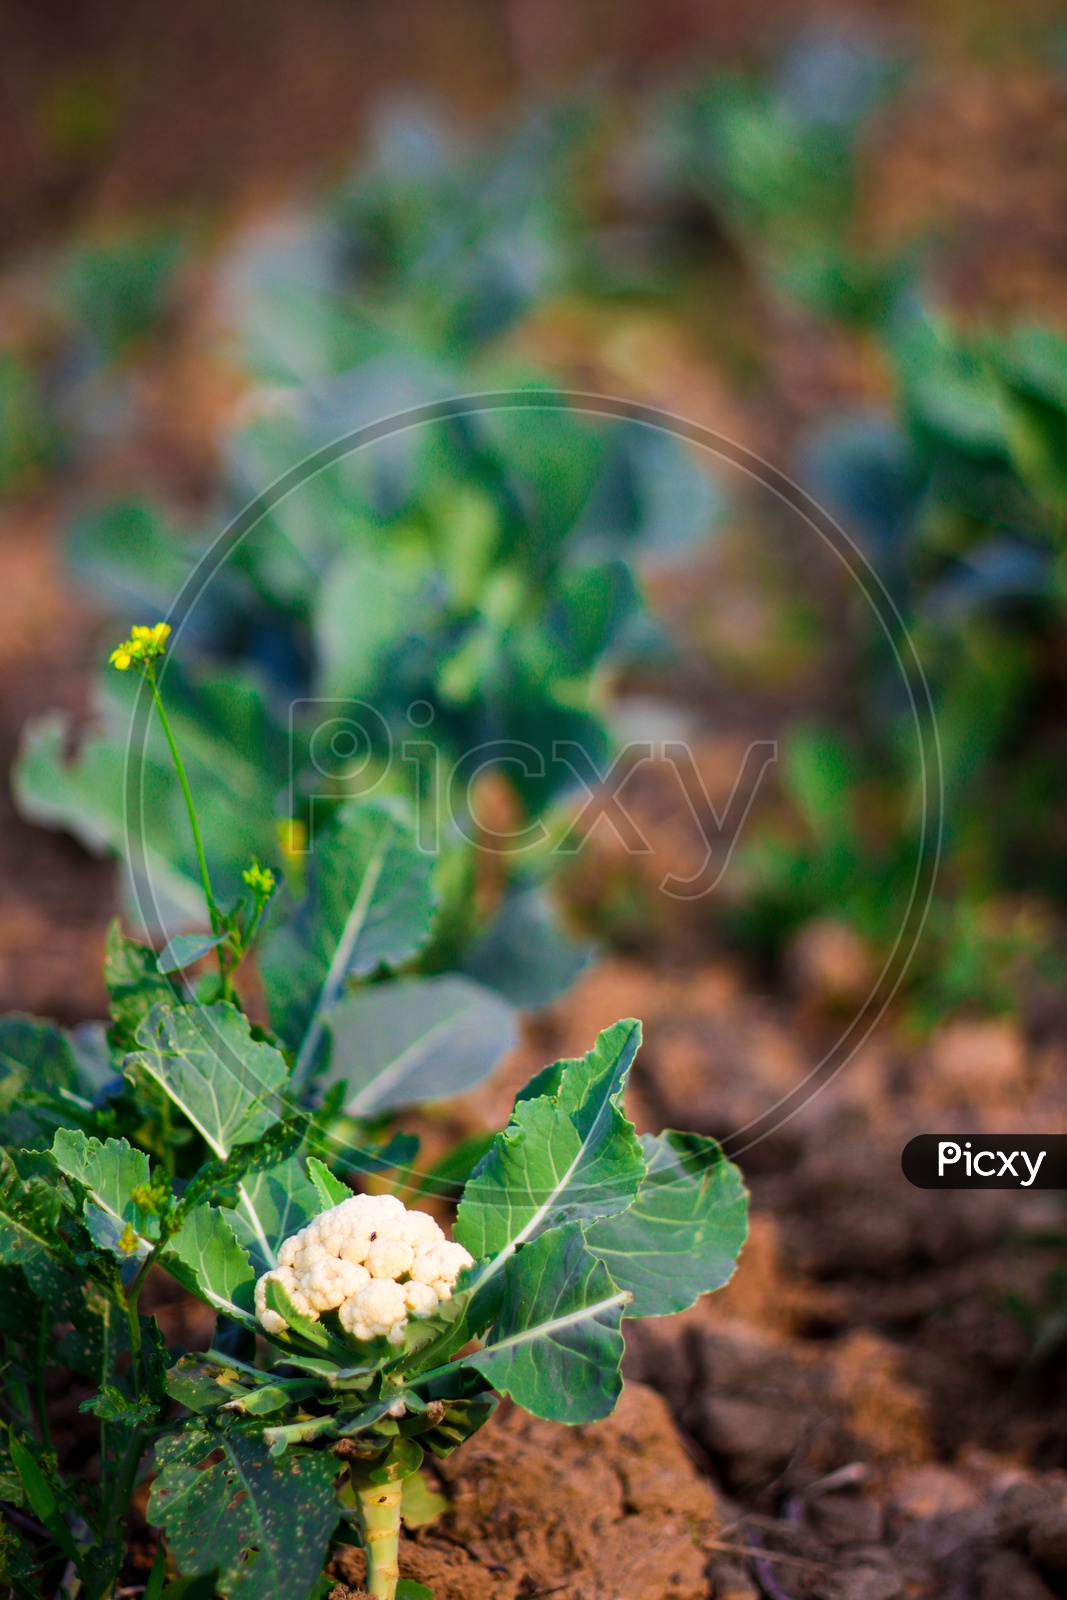 Isolated Selective Focus Of Cabbage Plants Planted In Rows In Farm With Excavated Soil Ready To Harvest